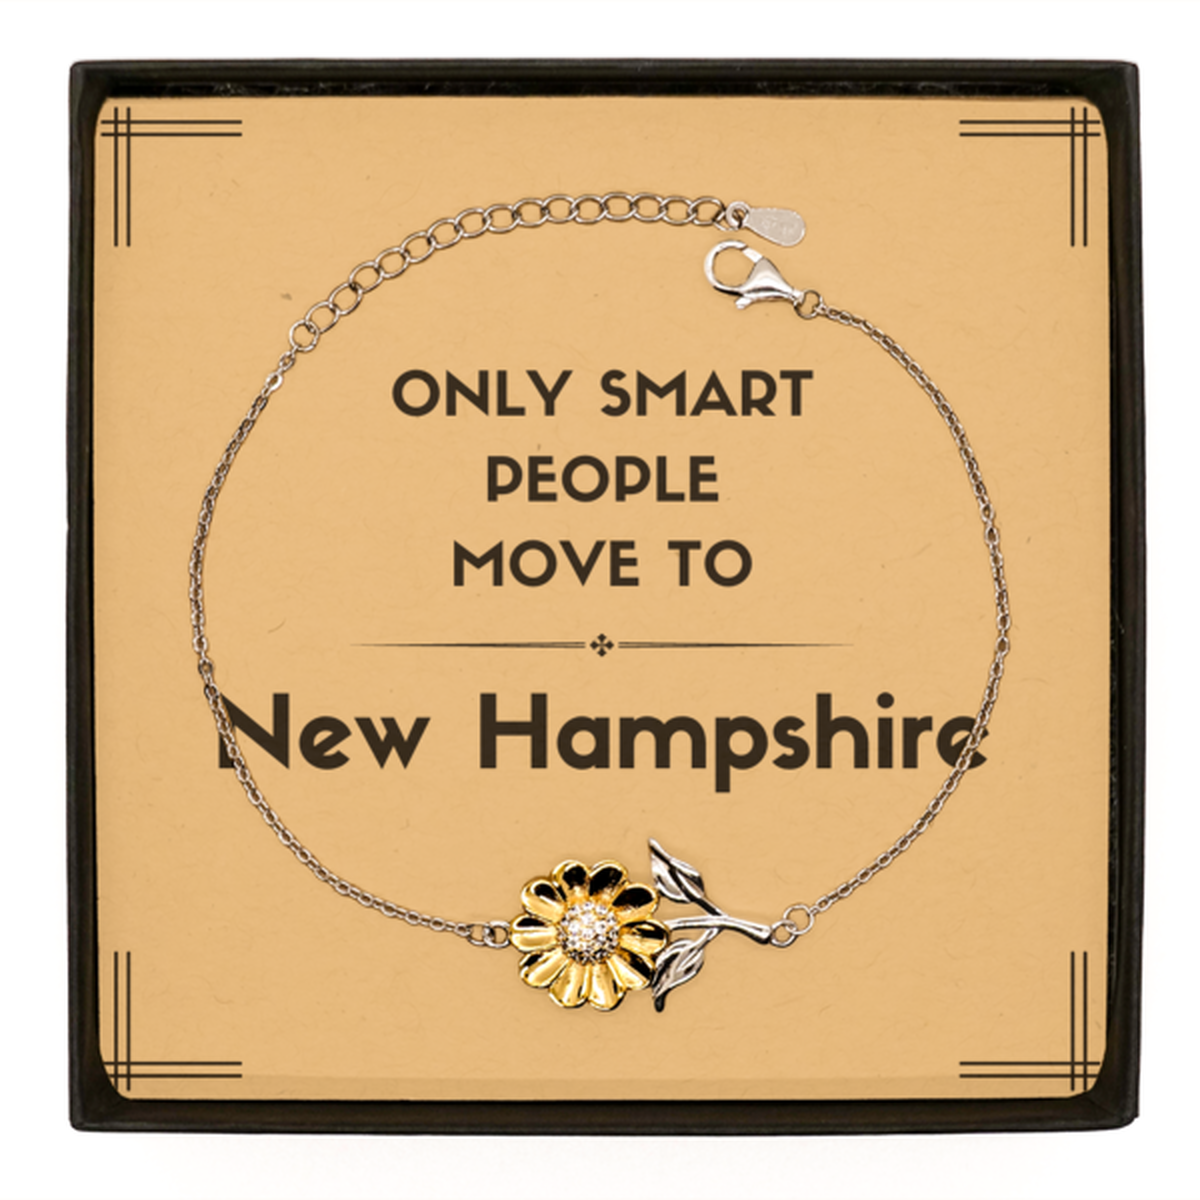 Only smart people move to New Hampshire Sunflower Bracelet, Message Card Gifts For New Hampshire, Move to New Hampshire Gifts for Friends Coworker Funny Saying Quote